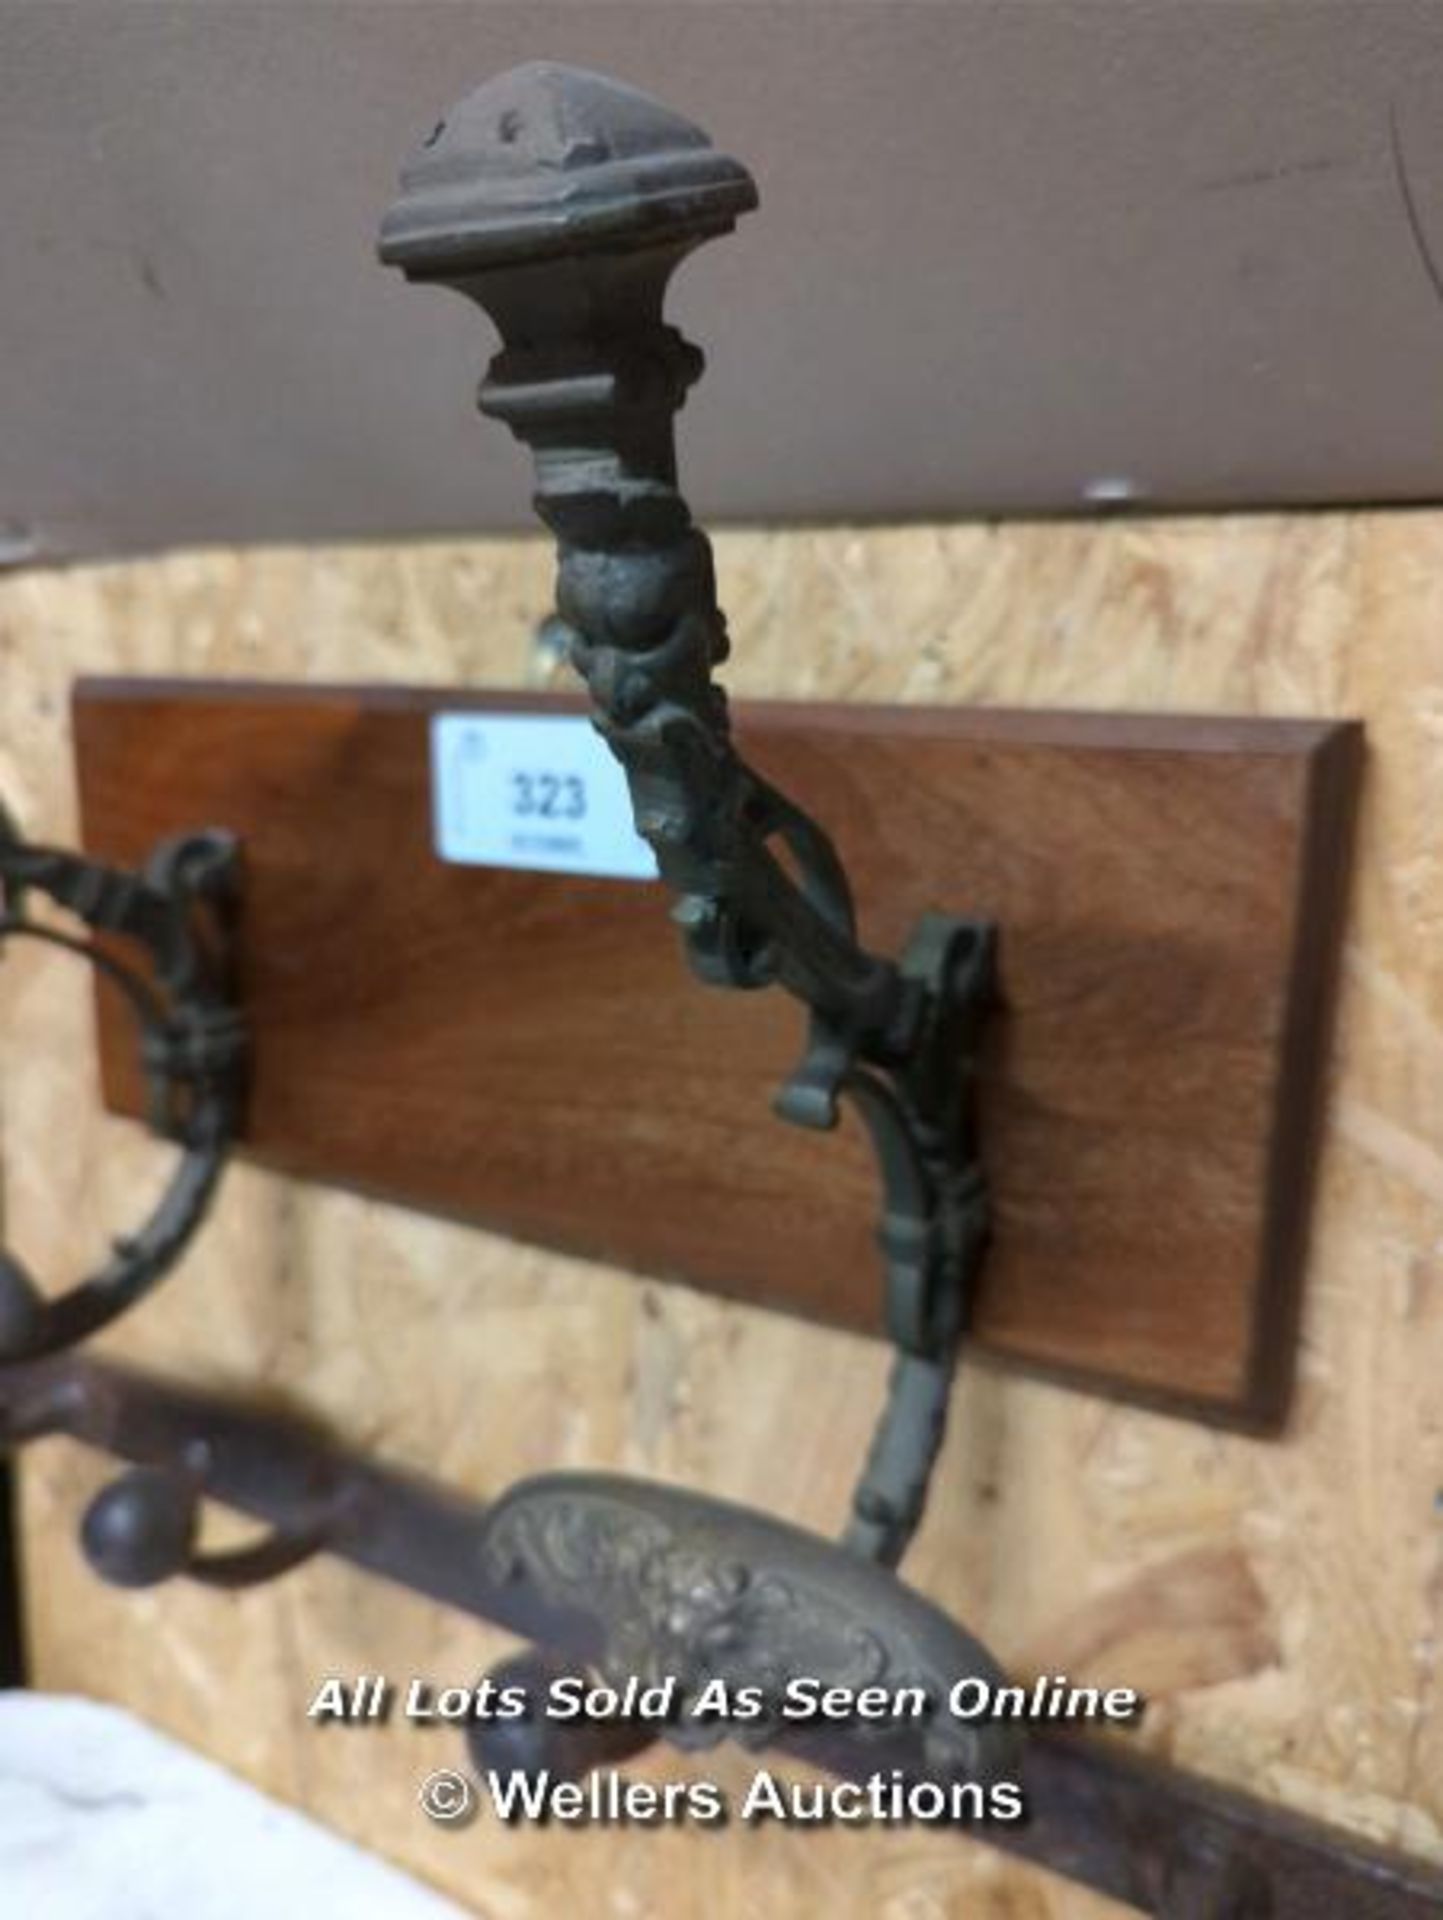 PAIR OF LARGE PERIOD BRASS FRENCH COAT HOOKS ON BACK BOARD - Image 3 of 3